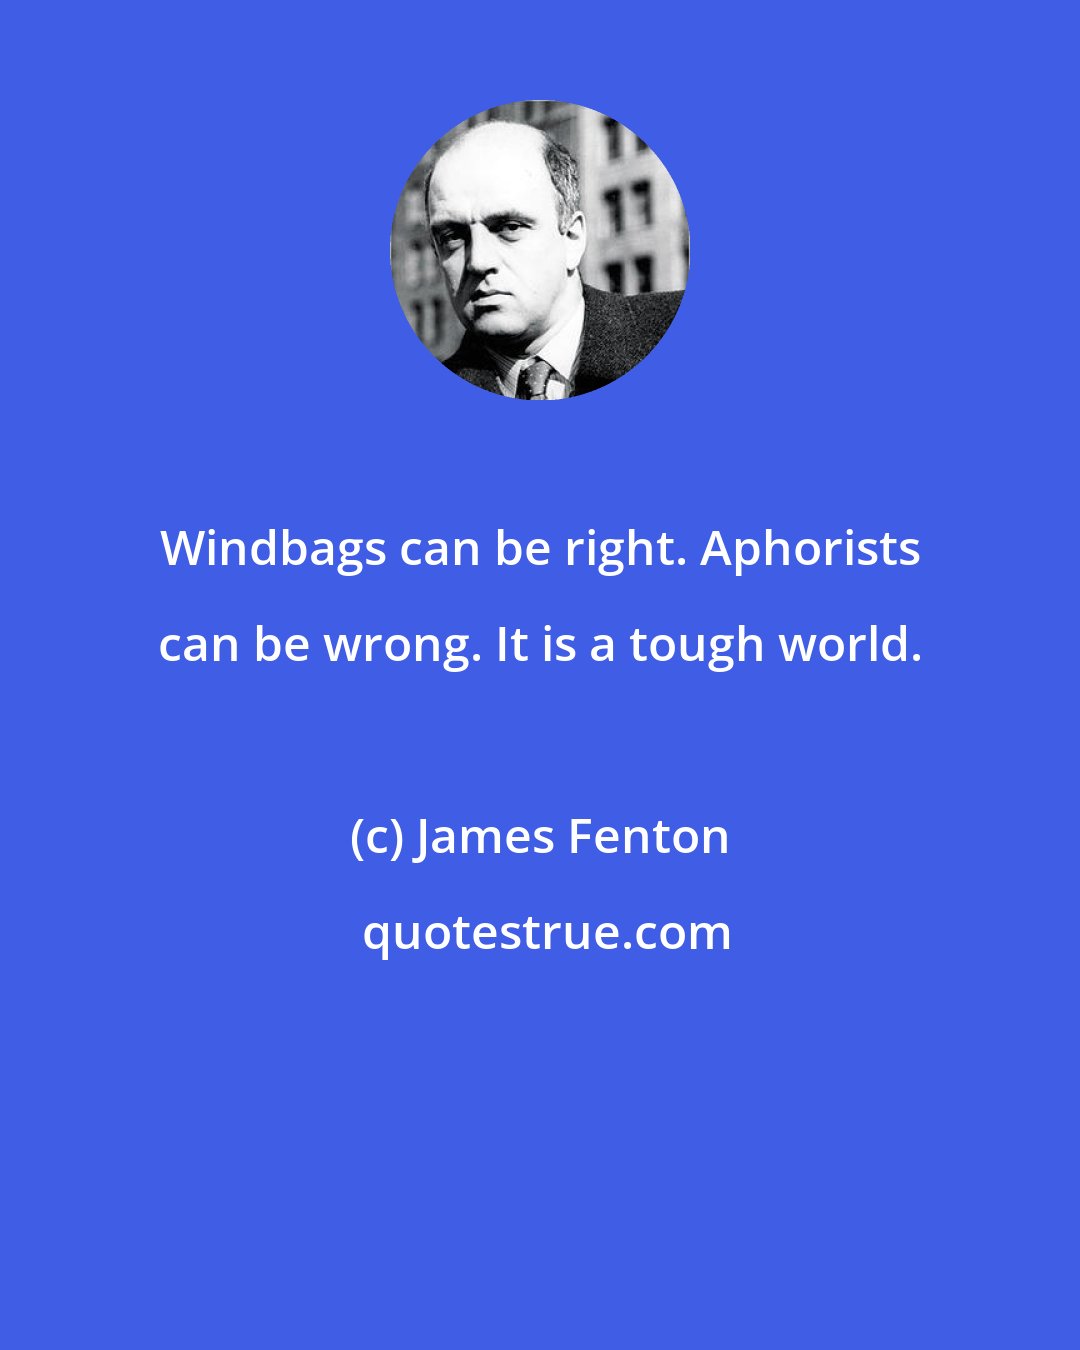 James Fenton: Windbags can be right. Aphorists can be wrong. It is a tough world.